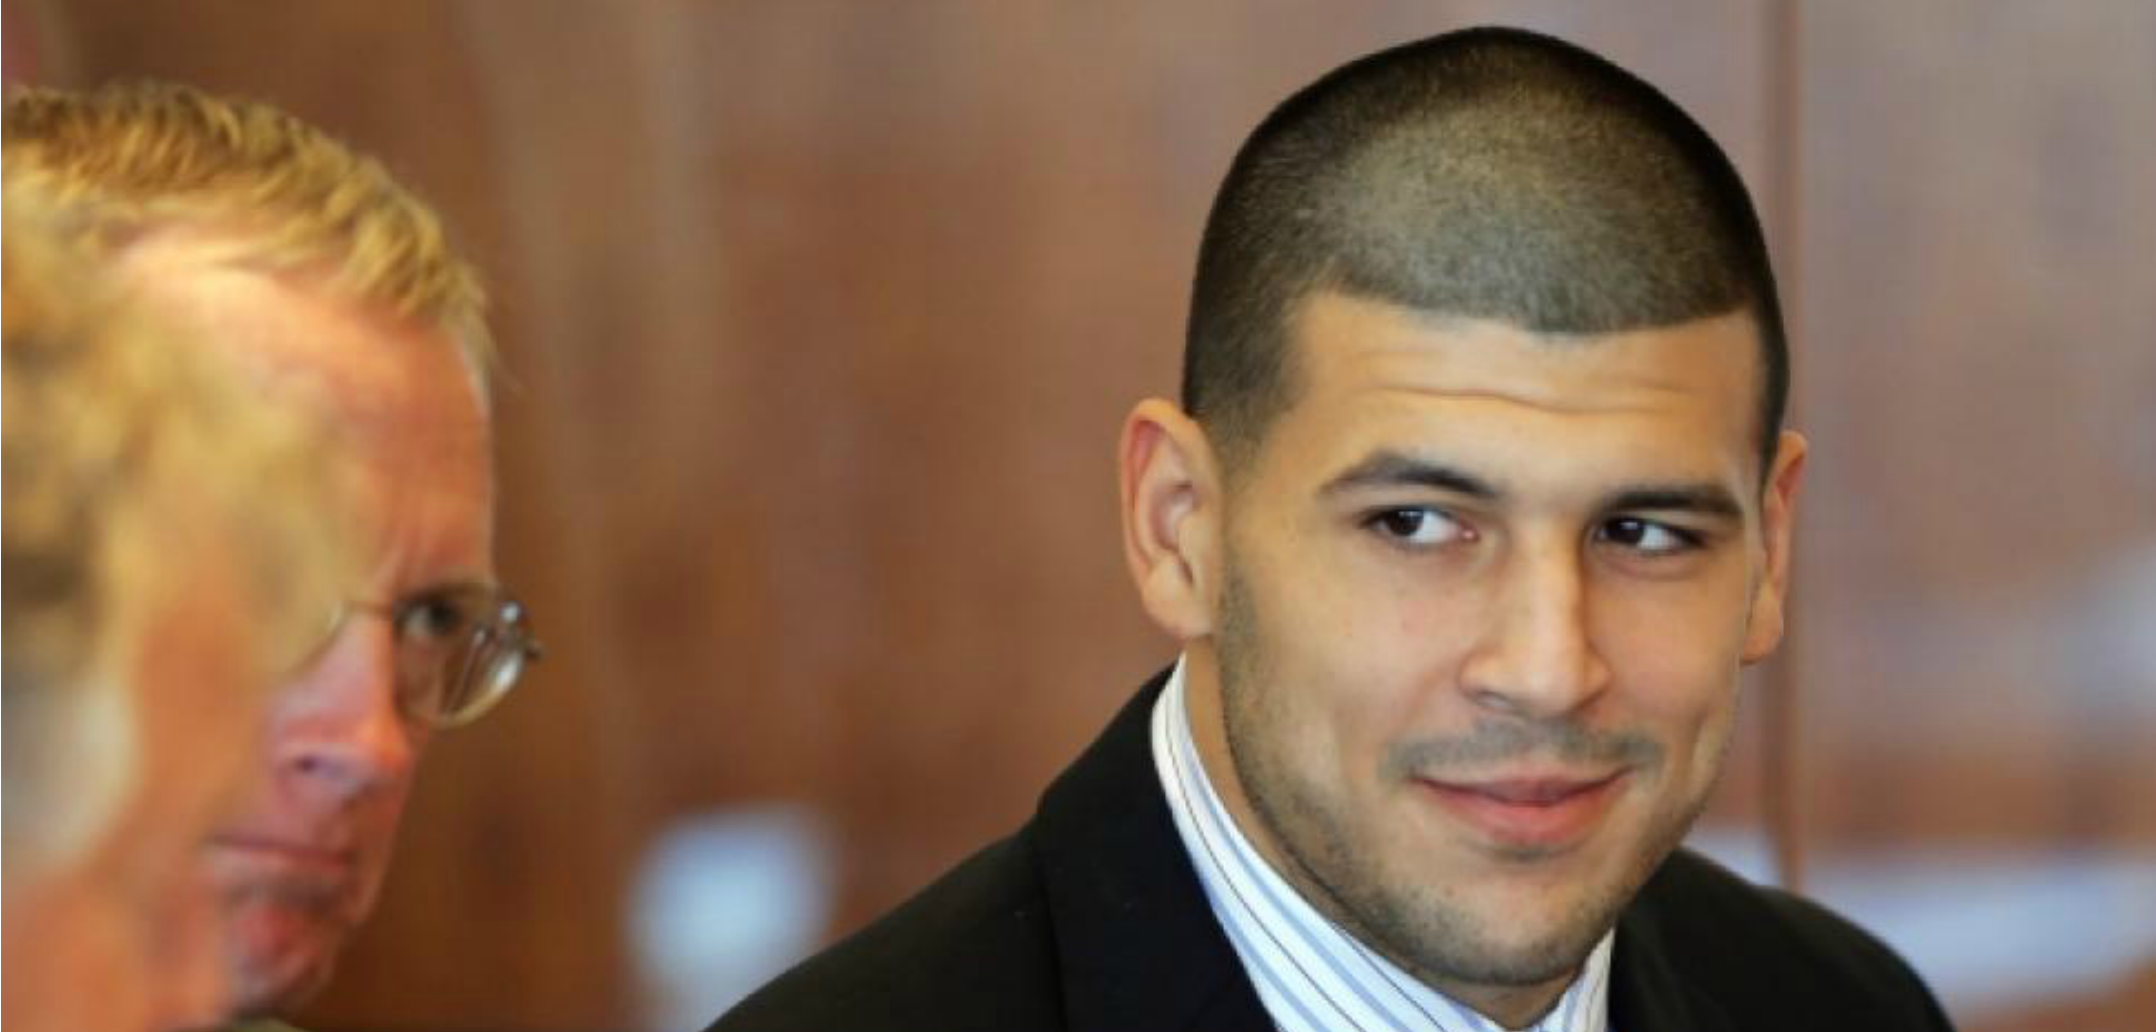 Judge Throws Out Big Piece Of Evidence In Aaron Hernandez Case